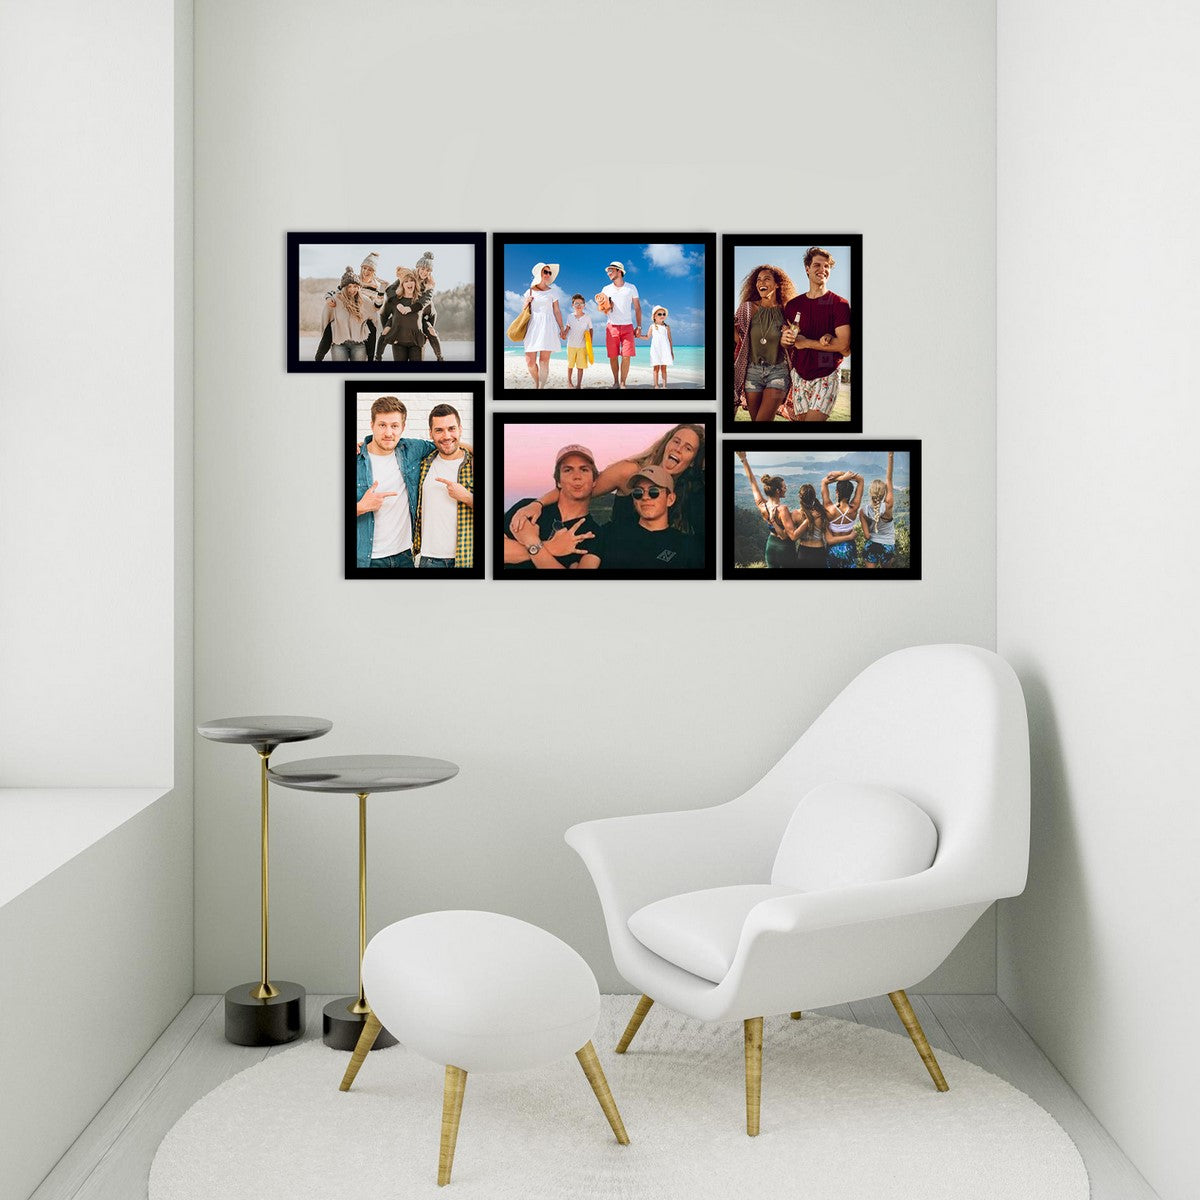 Memory Wall Collage Photo Frame - Set of 6 Photo Frames for 4 Photos of 5"x7", 2 Photos of 6"x8" 2